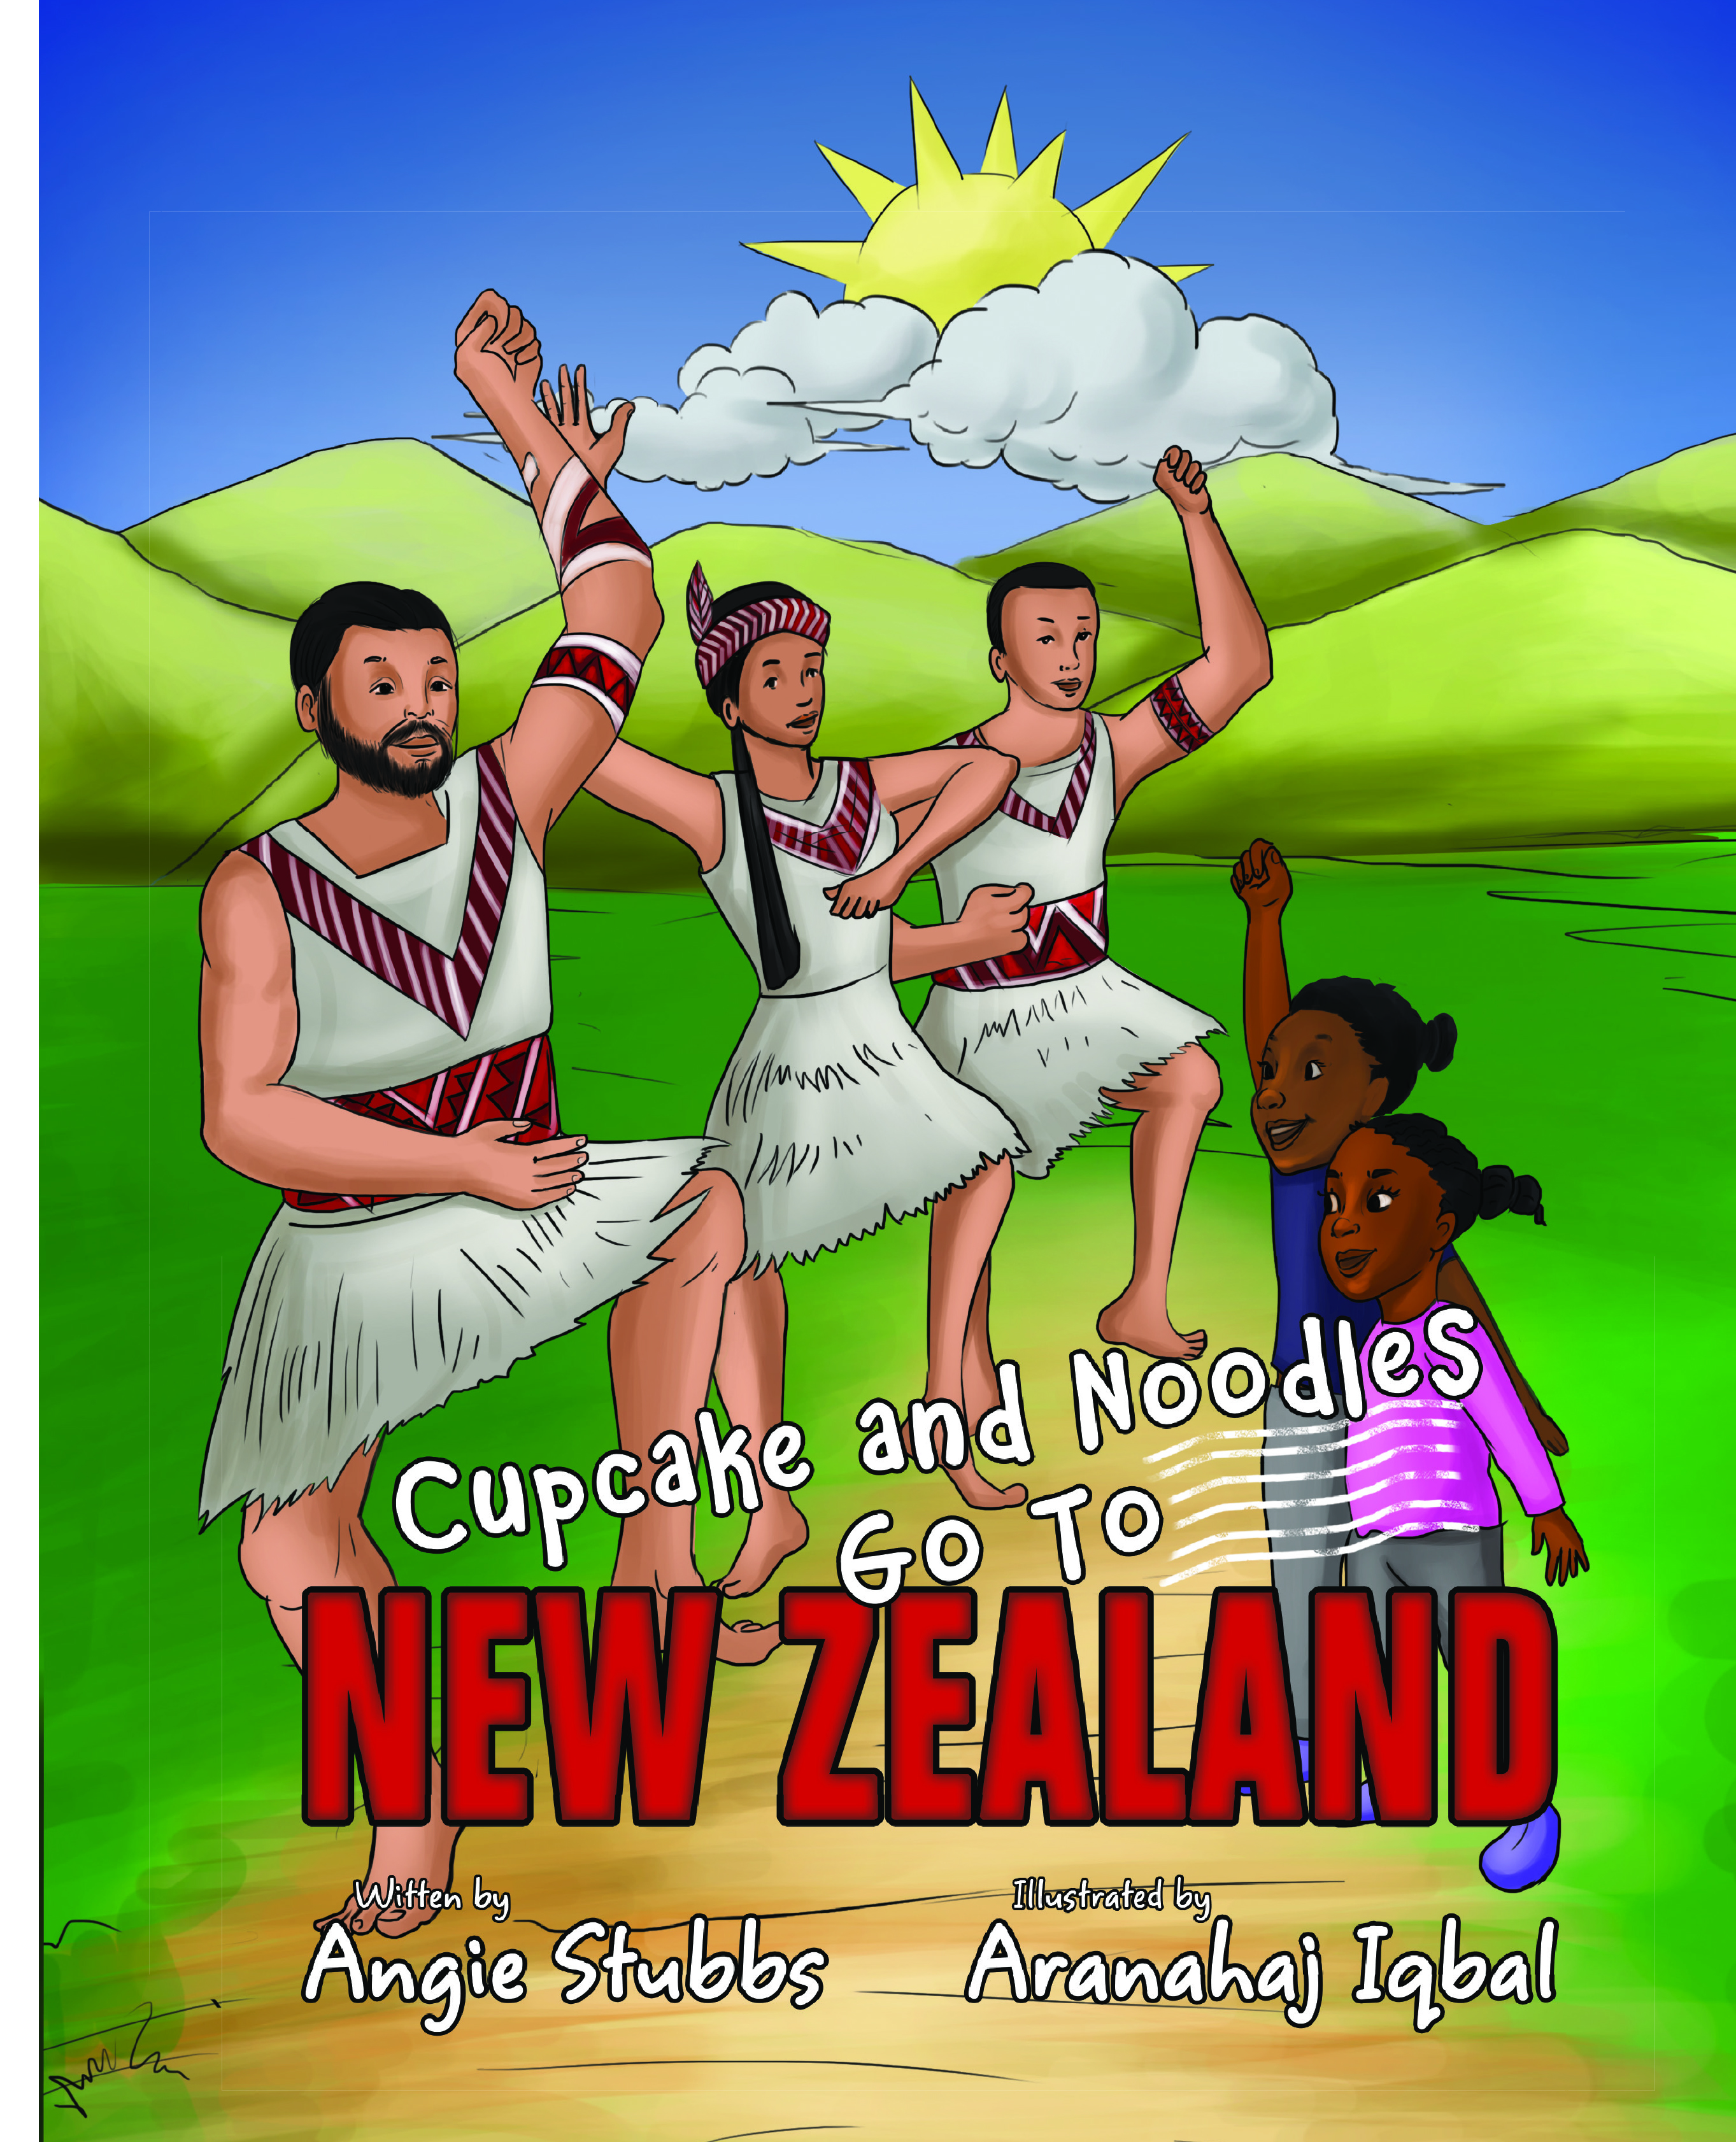 Cupcake and Noodles Go To New Zealand